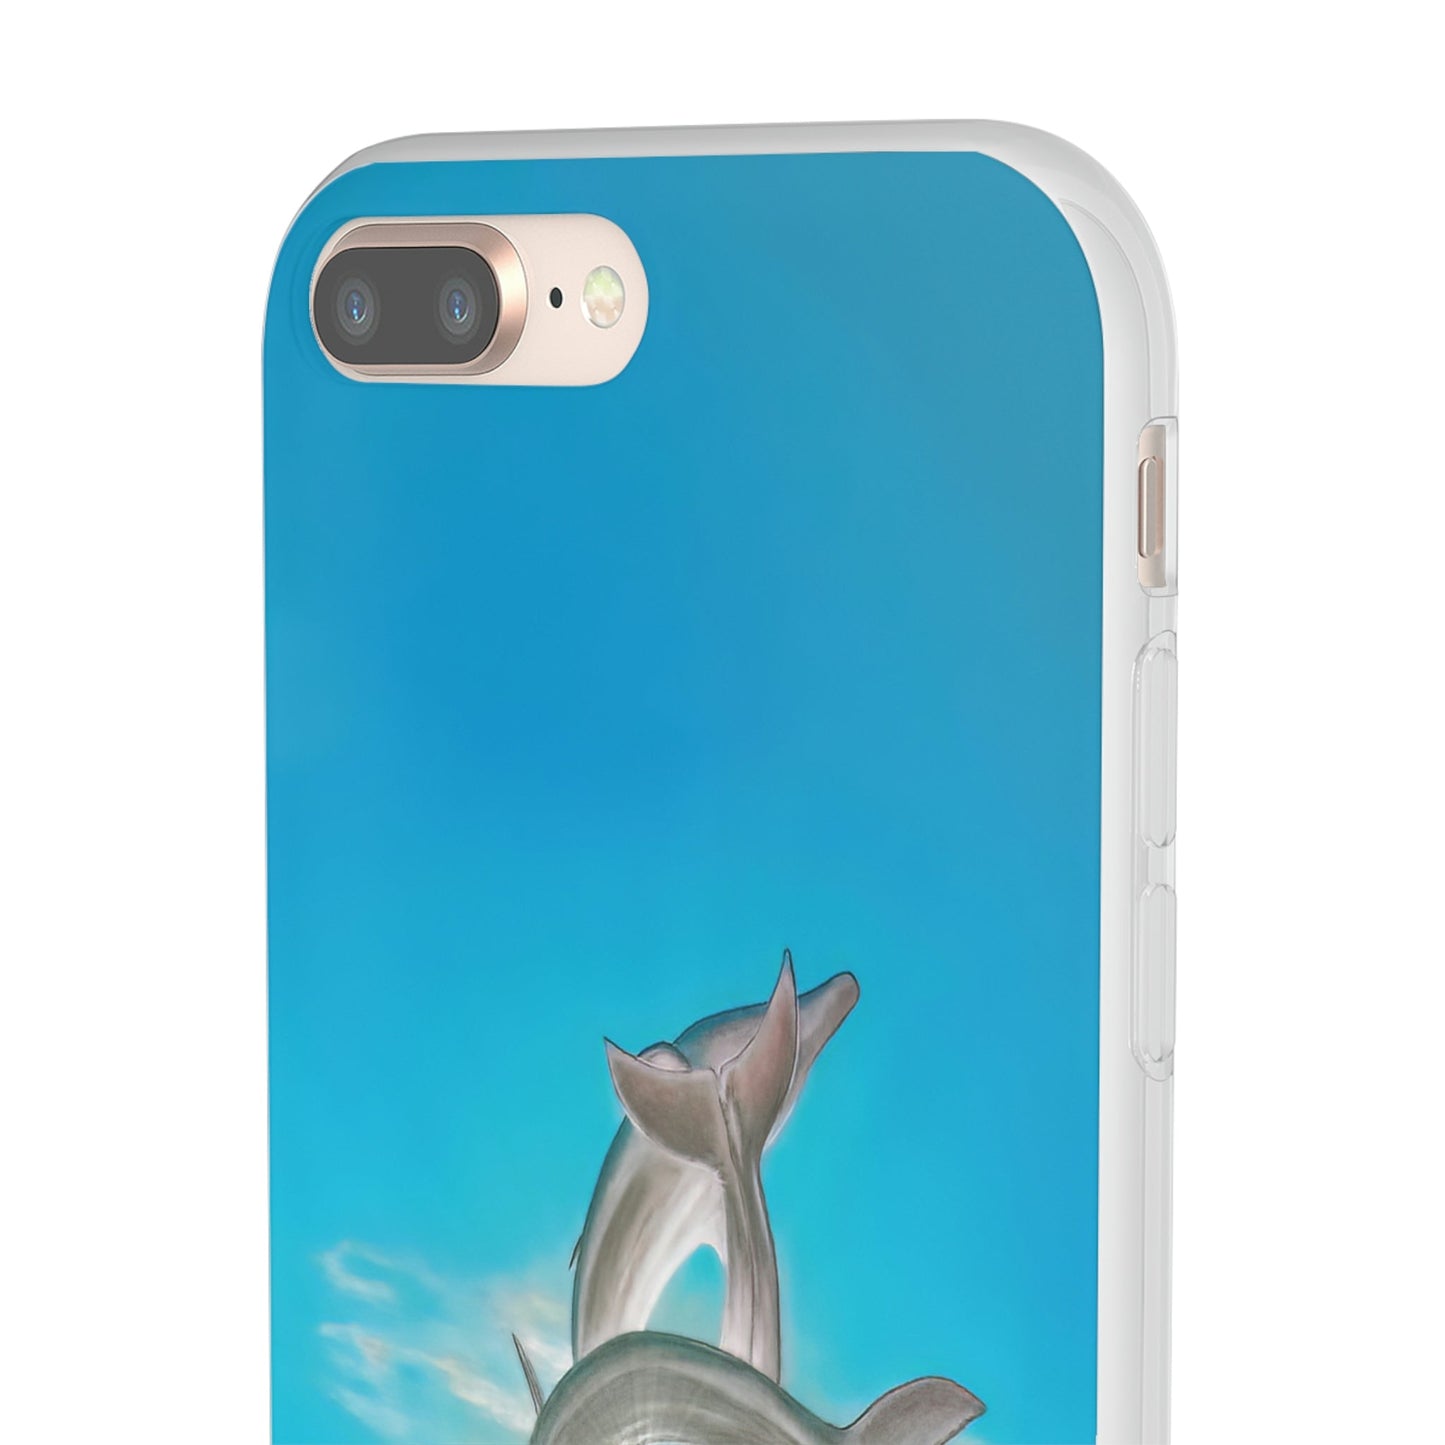 Flexi Cases - "THE DOLPHINS" Kelowna, BC